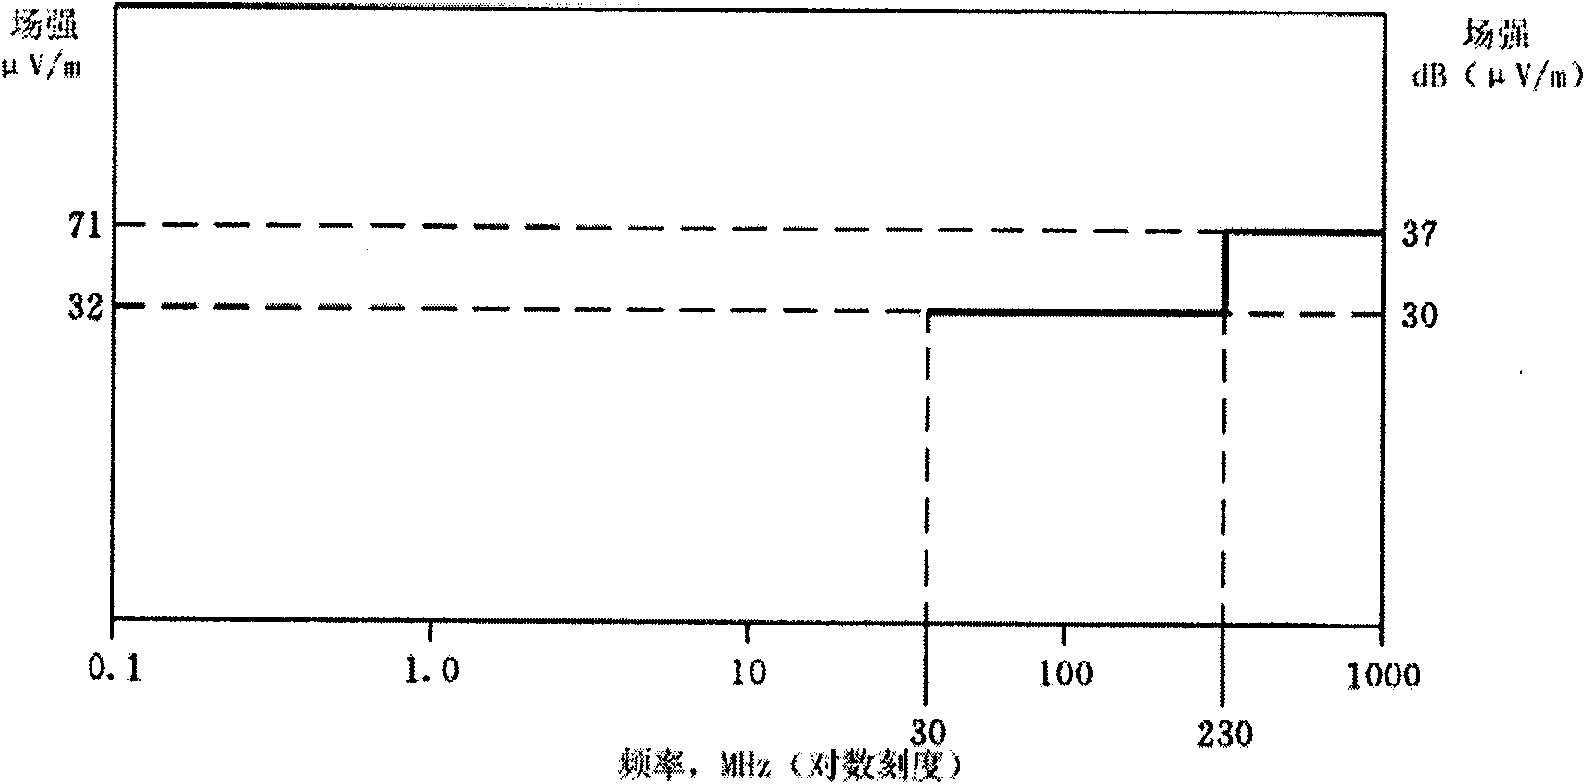 Method for testing electromagnetic compatibility (EMC) of electrically-driven automobile